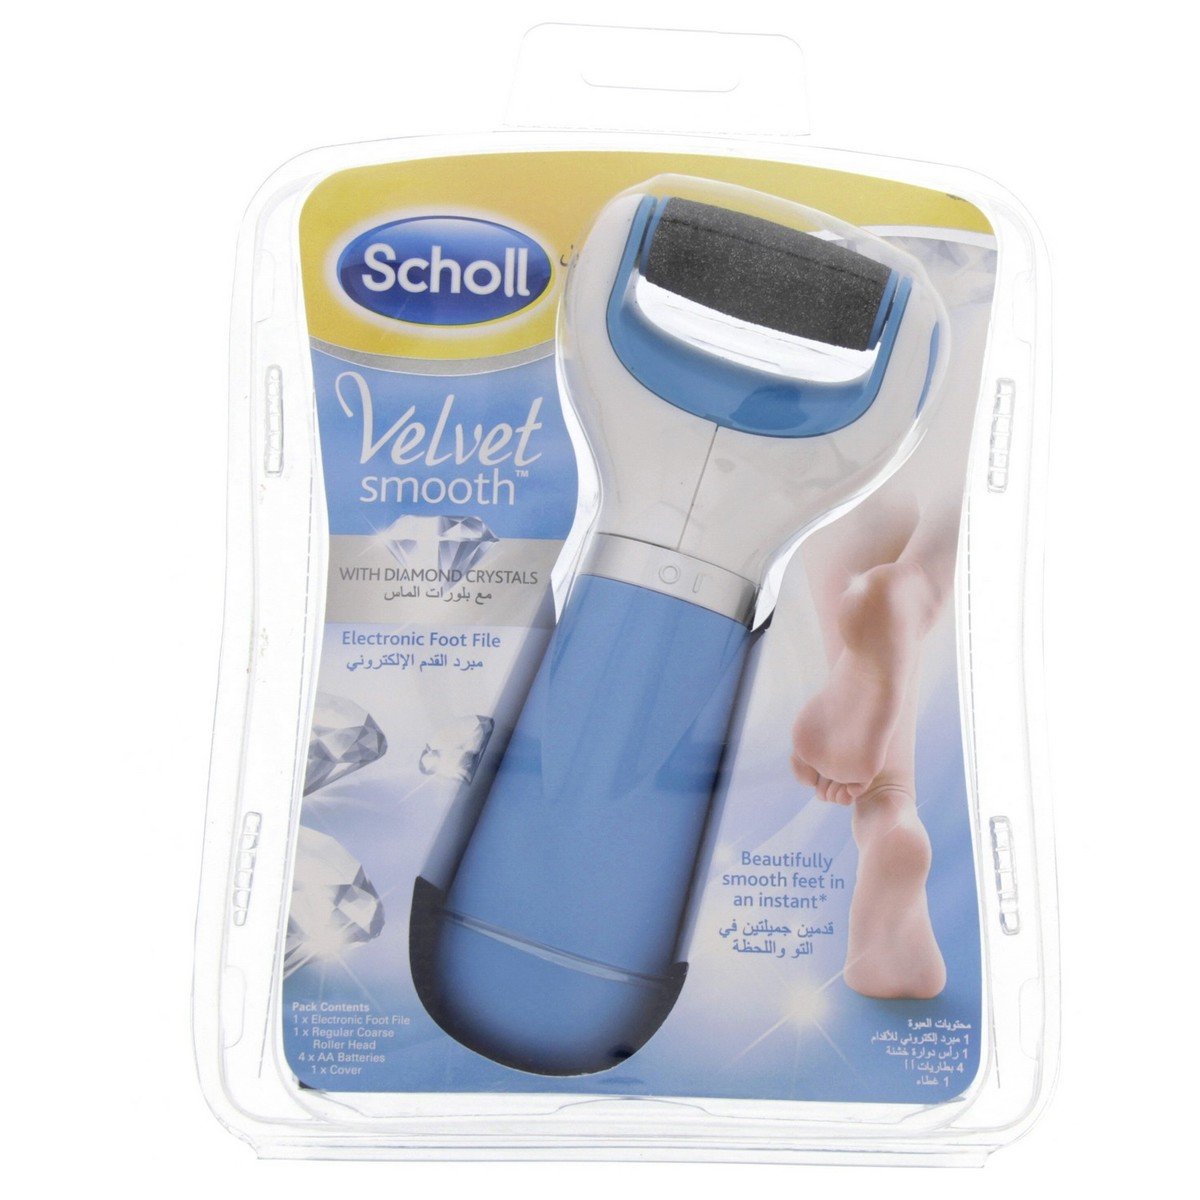 Scholl Velvet Smooth Electronic Foot File 1pc